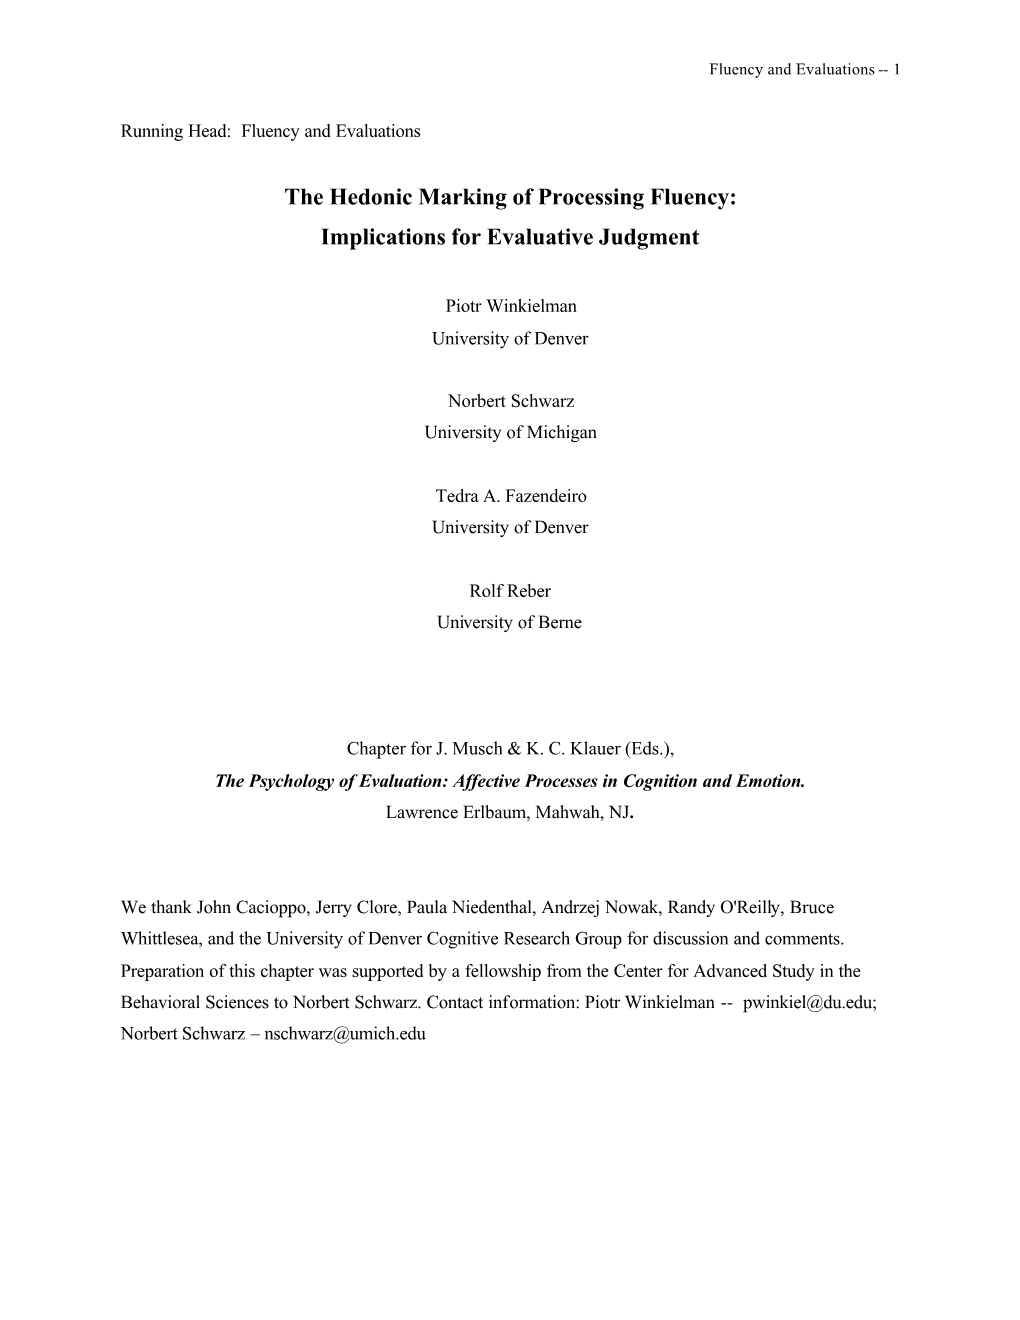 The Hedonic Marking of Processing Fluency: Implications for Evaluative Judgment